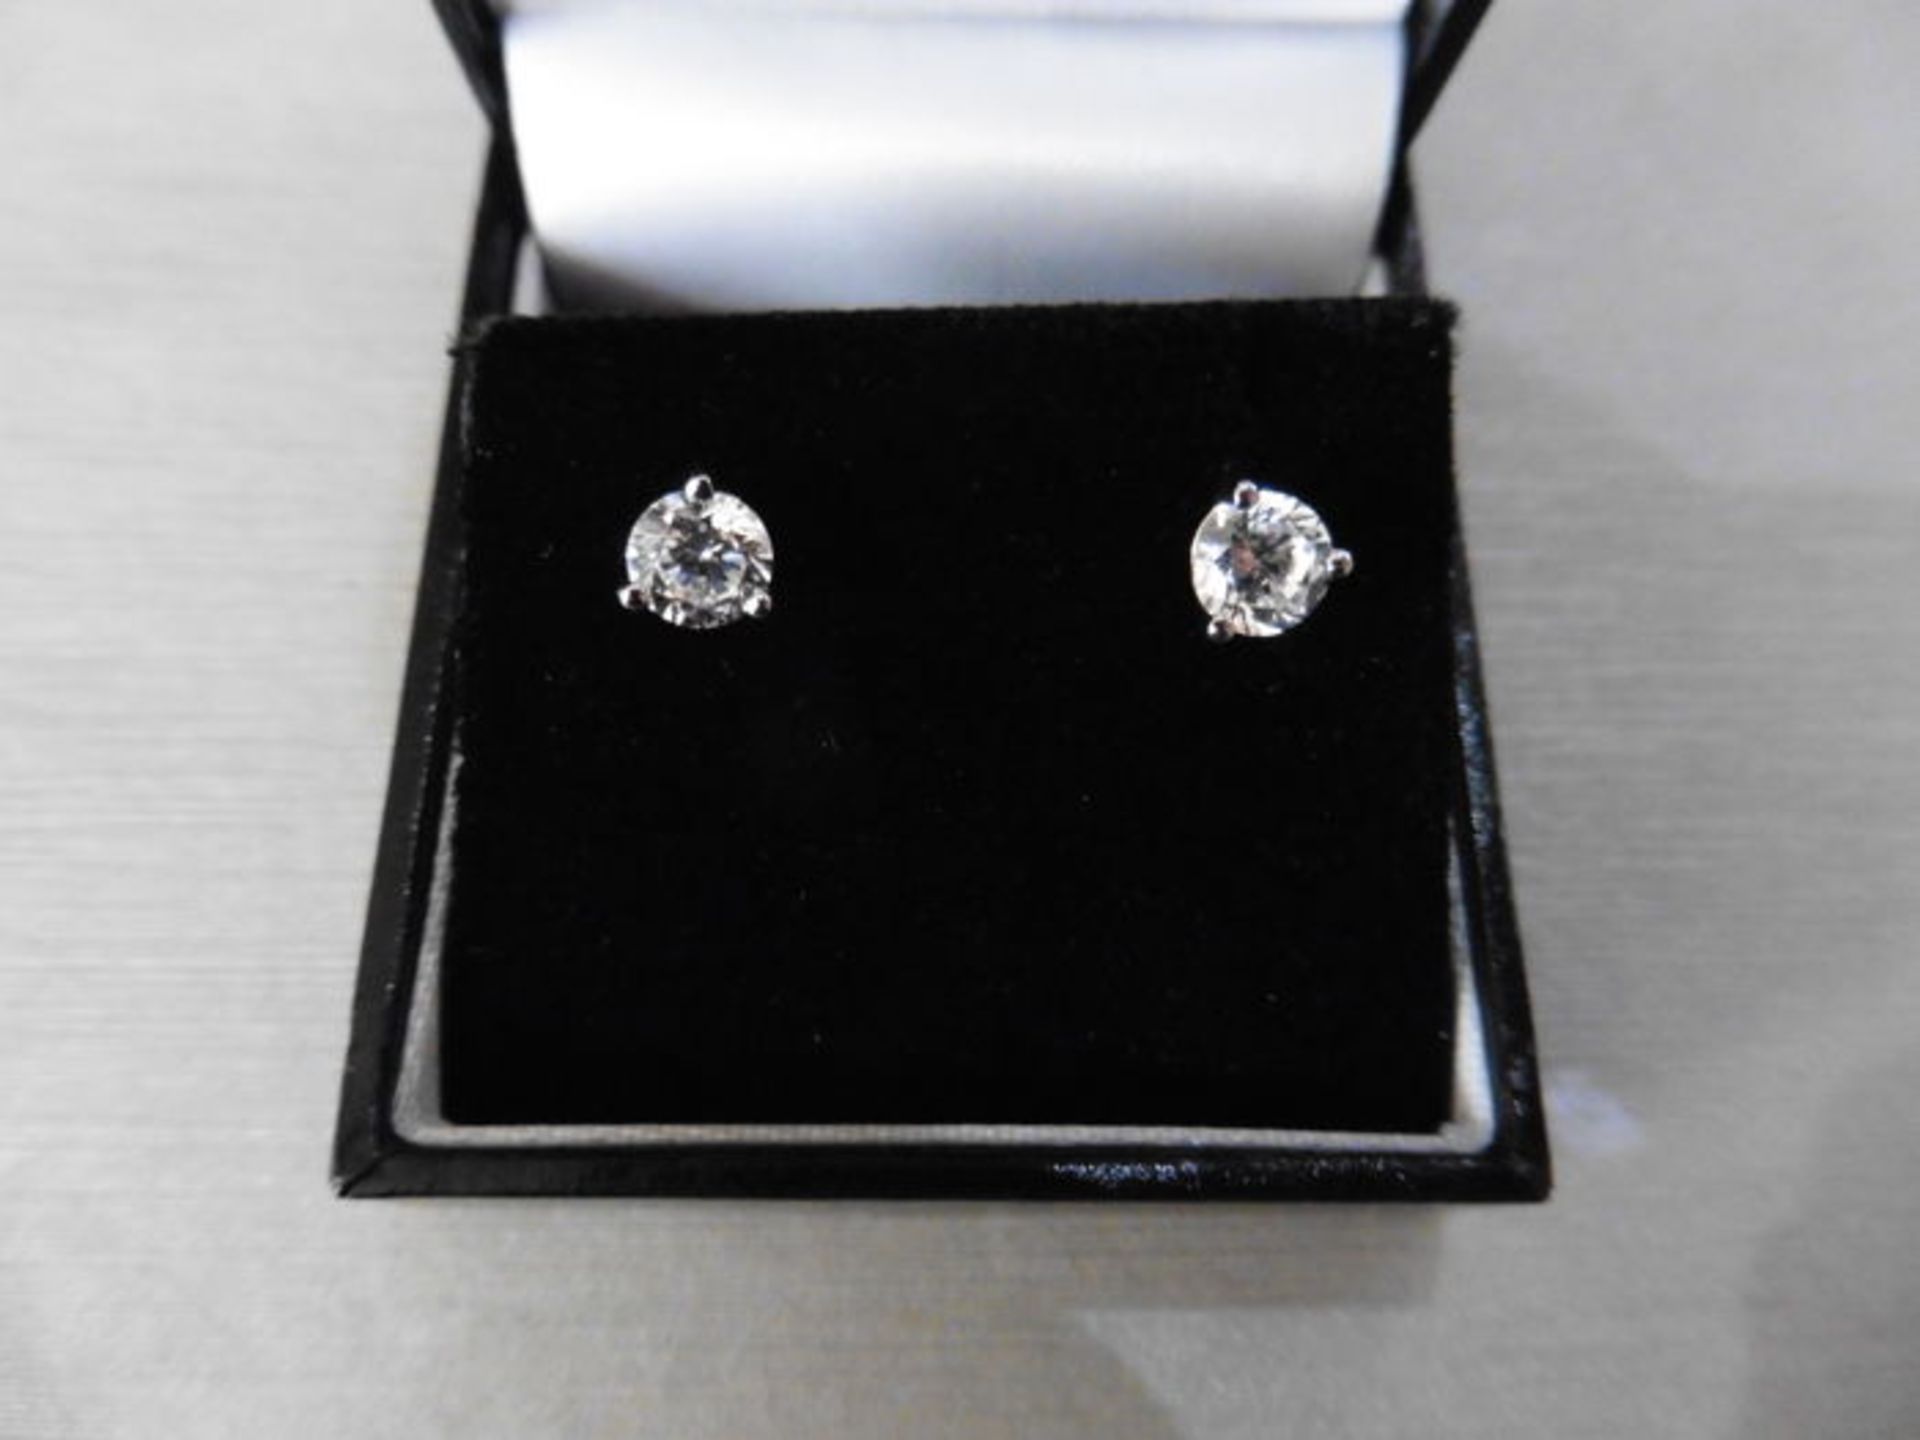 0.70ct diamond solitaire stud earrings set in platinum. I/J colour, si2 clarity.3 claw setting - Image 3 of 3